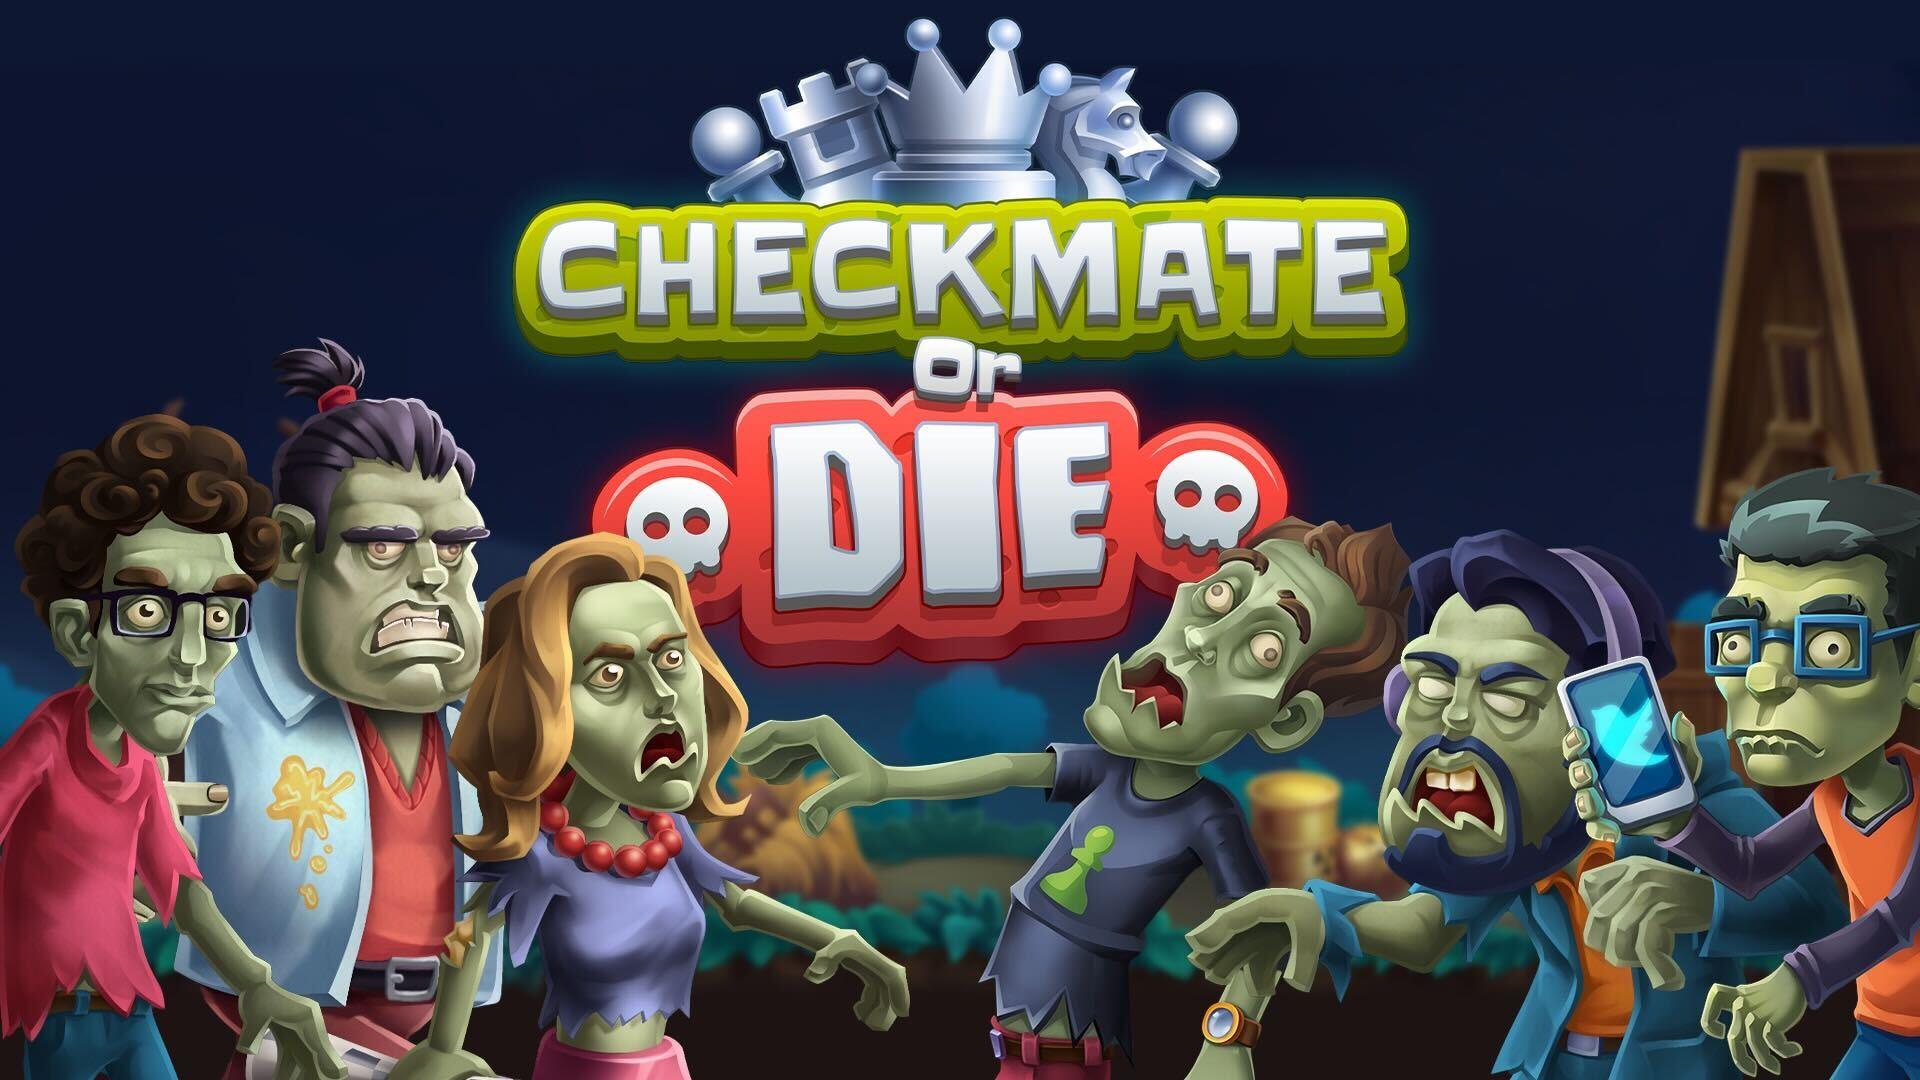 Chess.com Releases New App And Bots: Checkmate Or Die